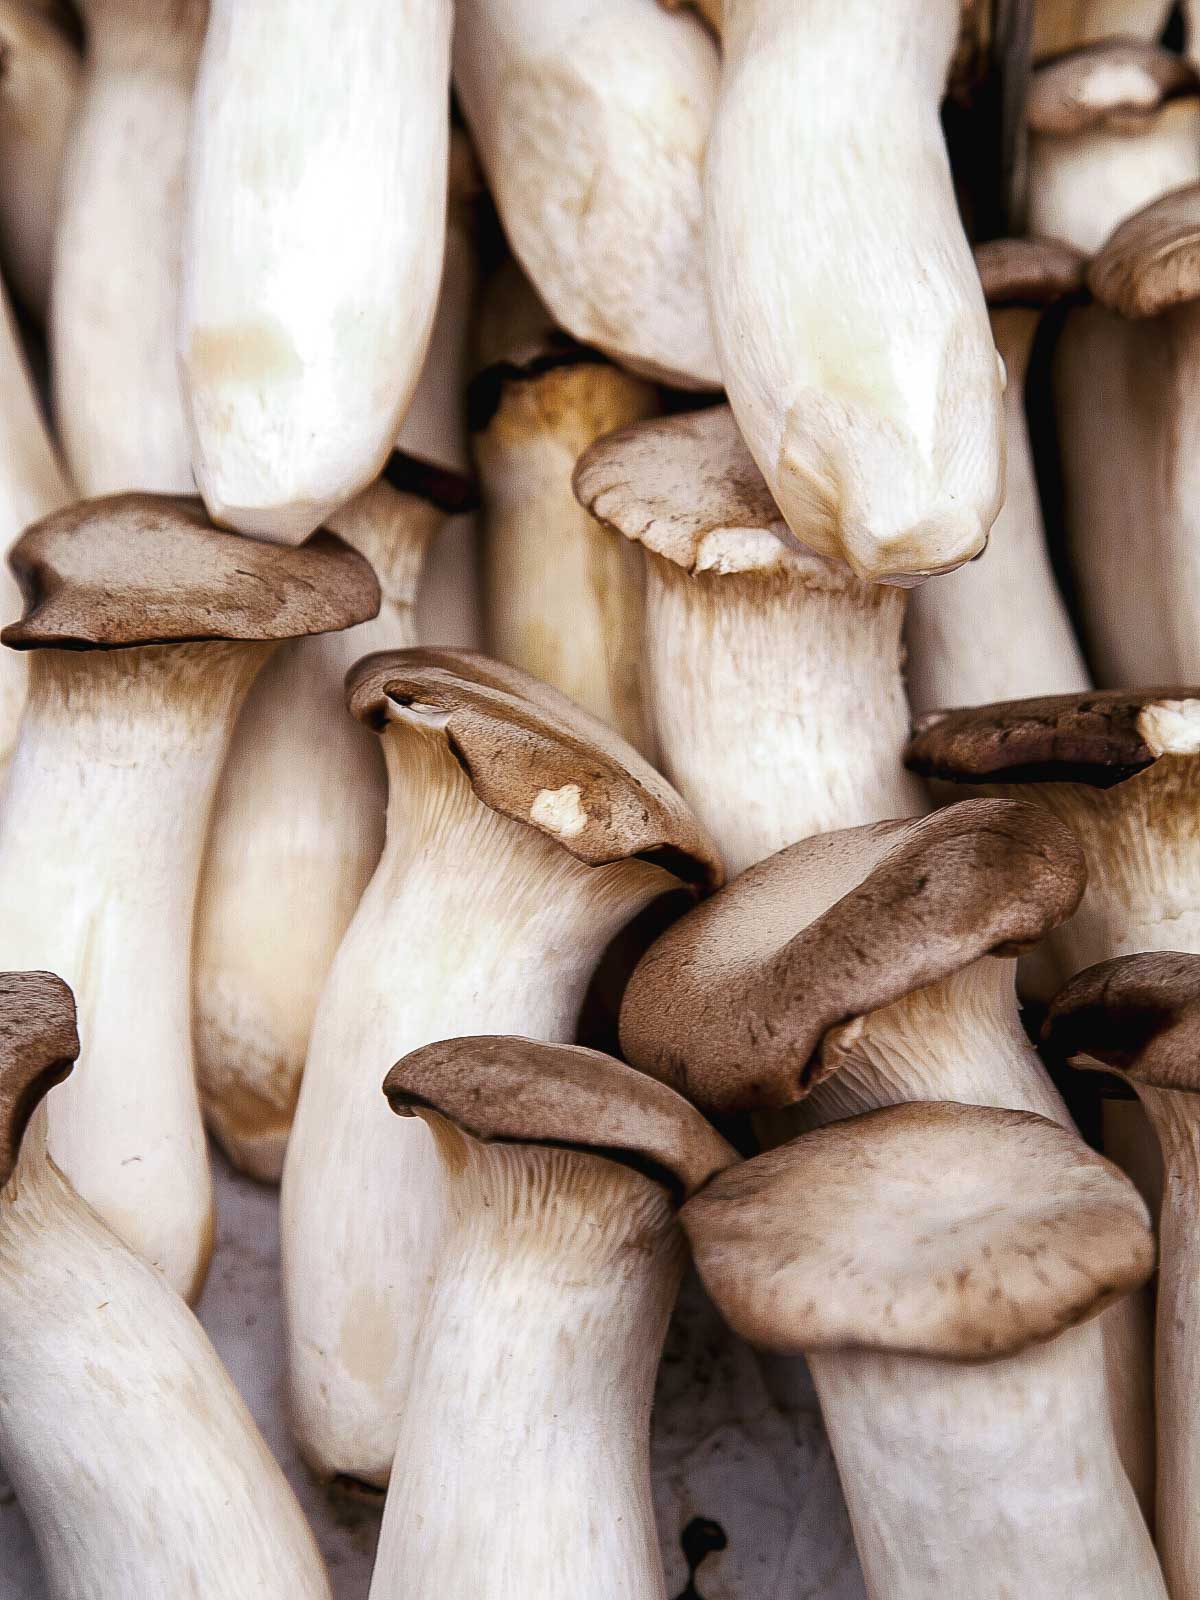 King Oyster mushrooms reference image.